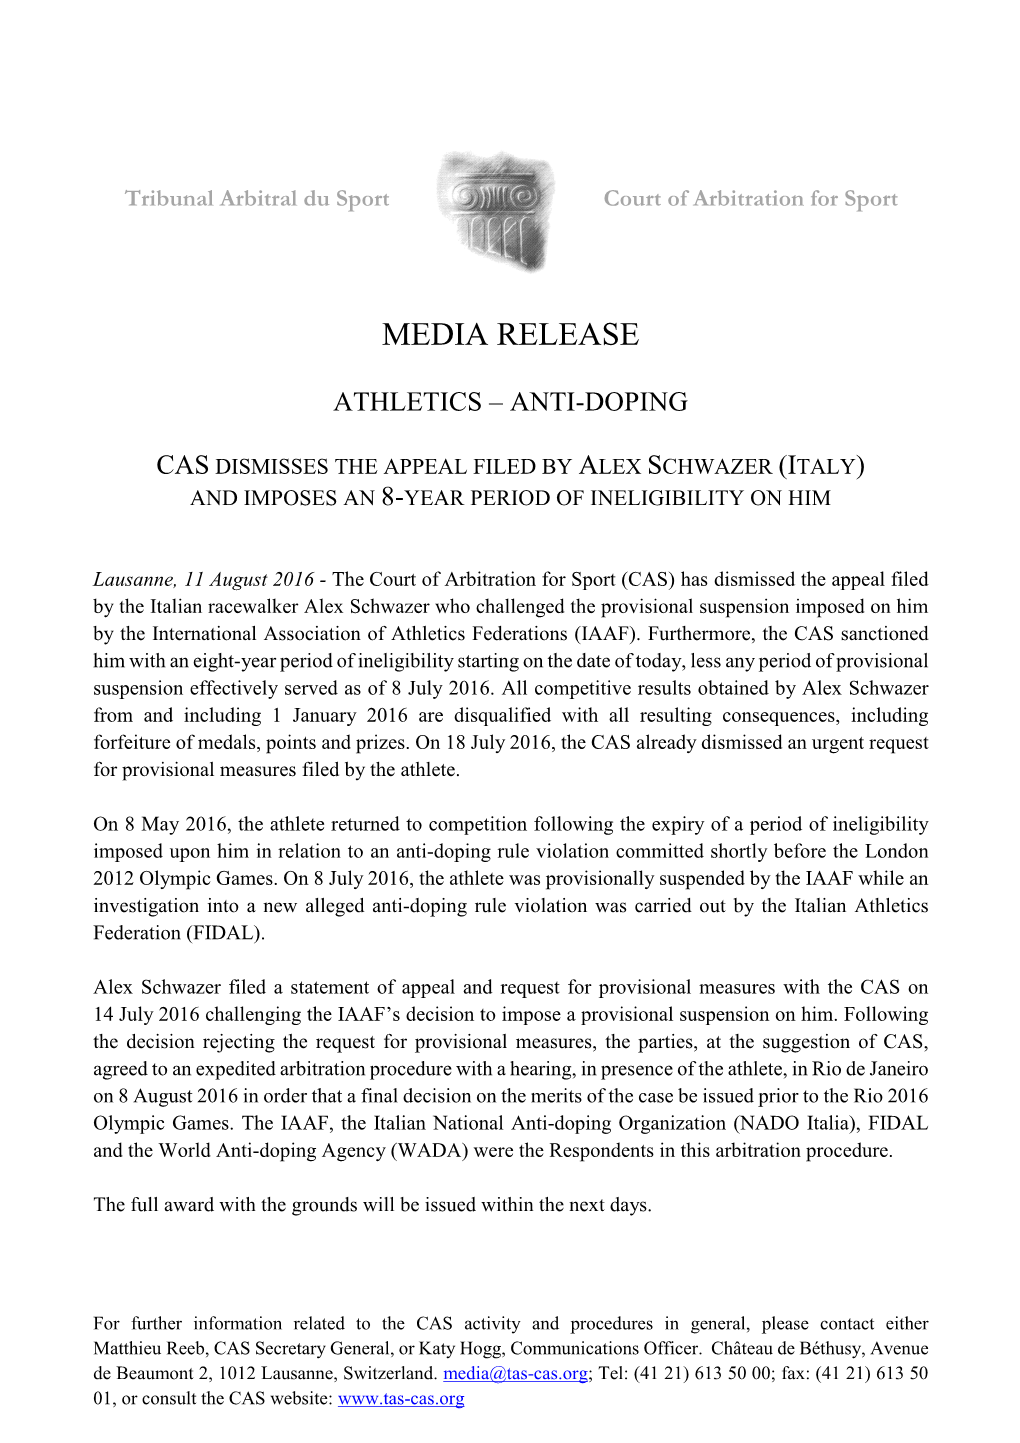 Cas Dismisses the Appeal Filed by Alex Schwazer (I Taly ) and Imposes an 8-Year Period of Ineligibility on Him